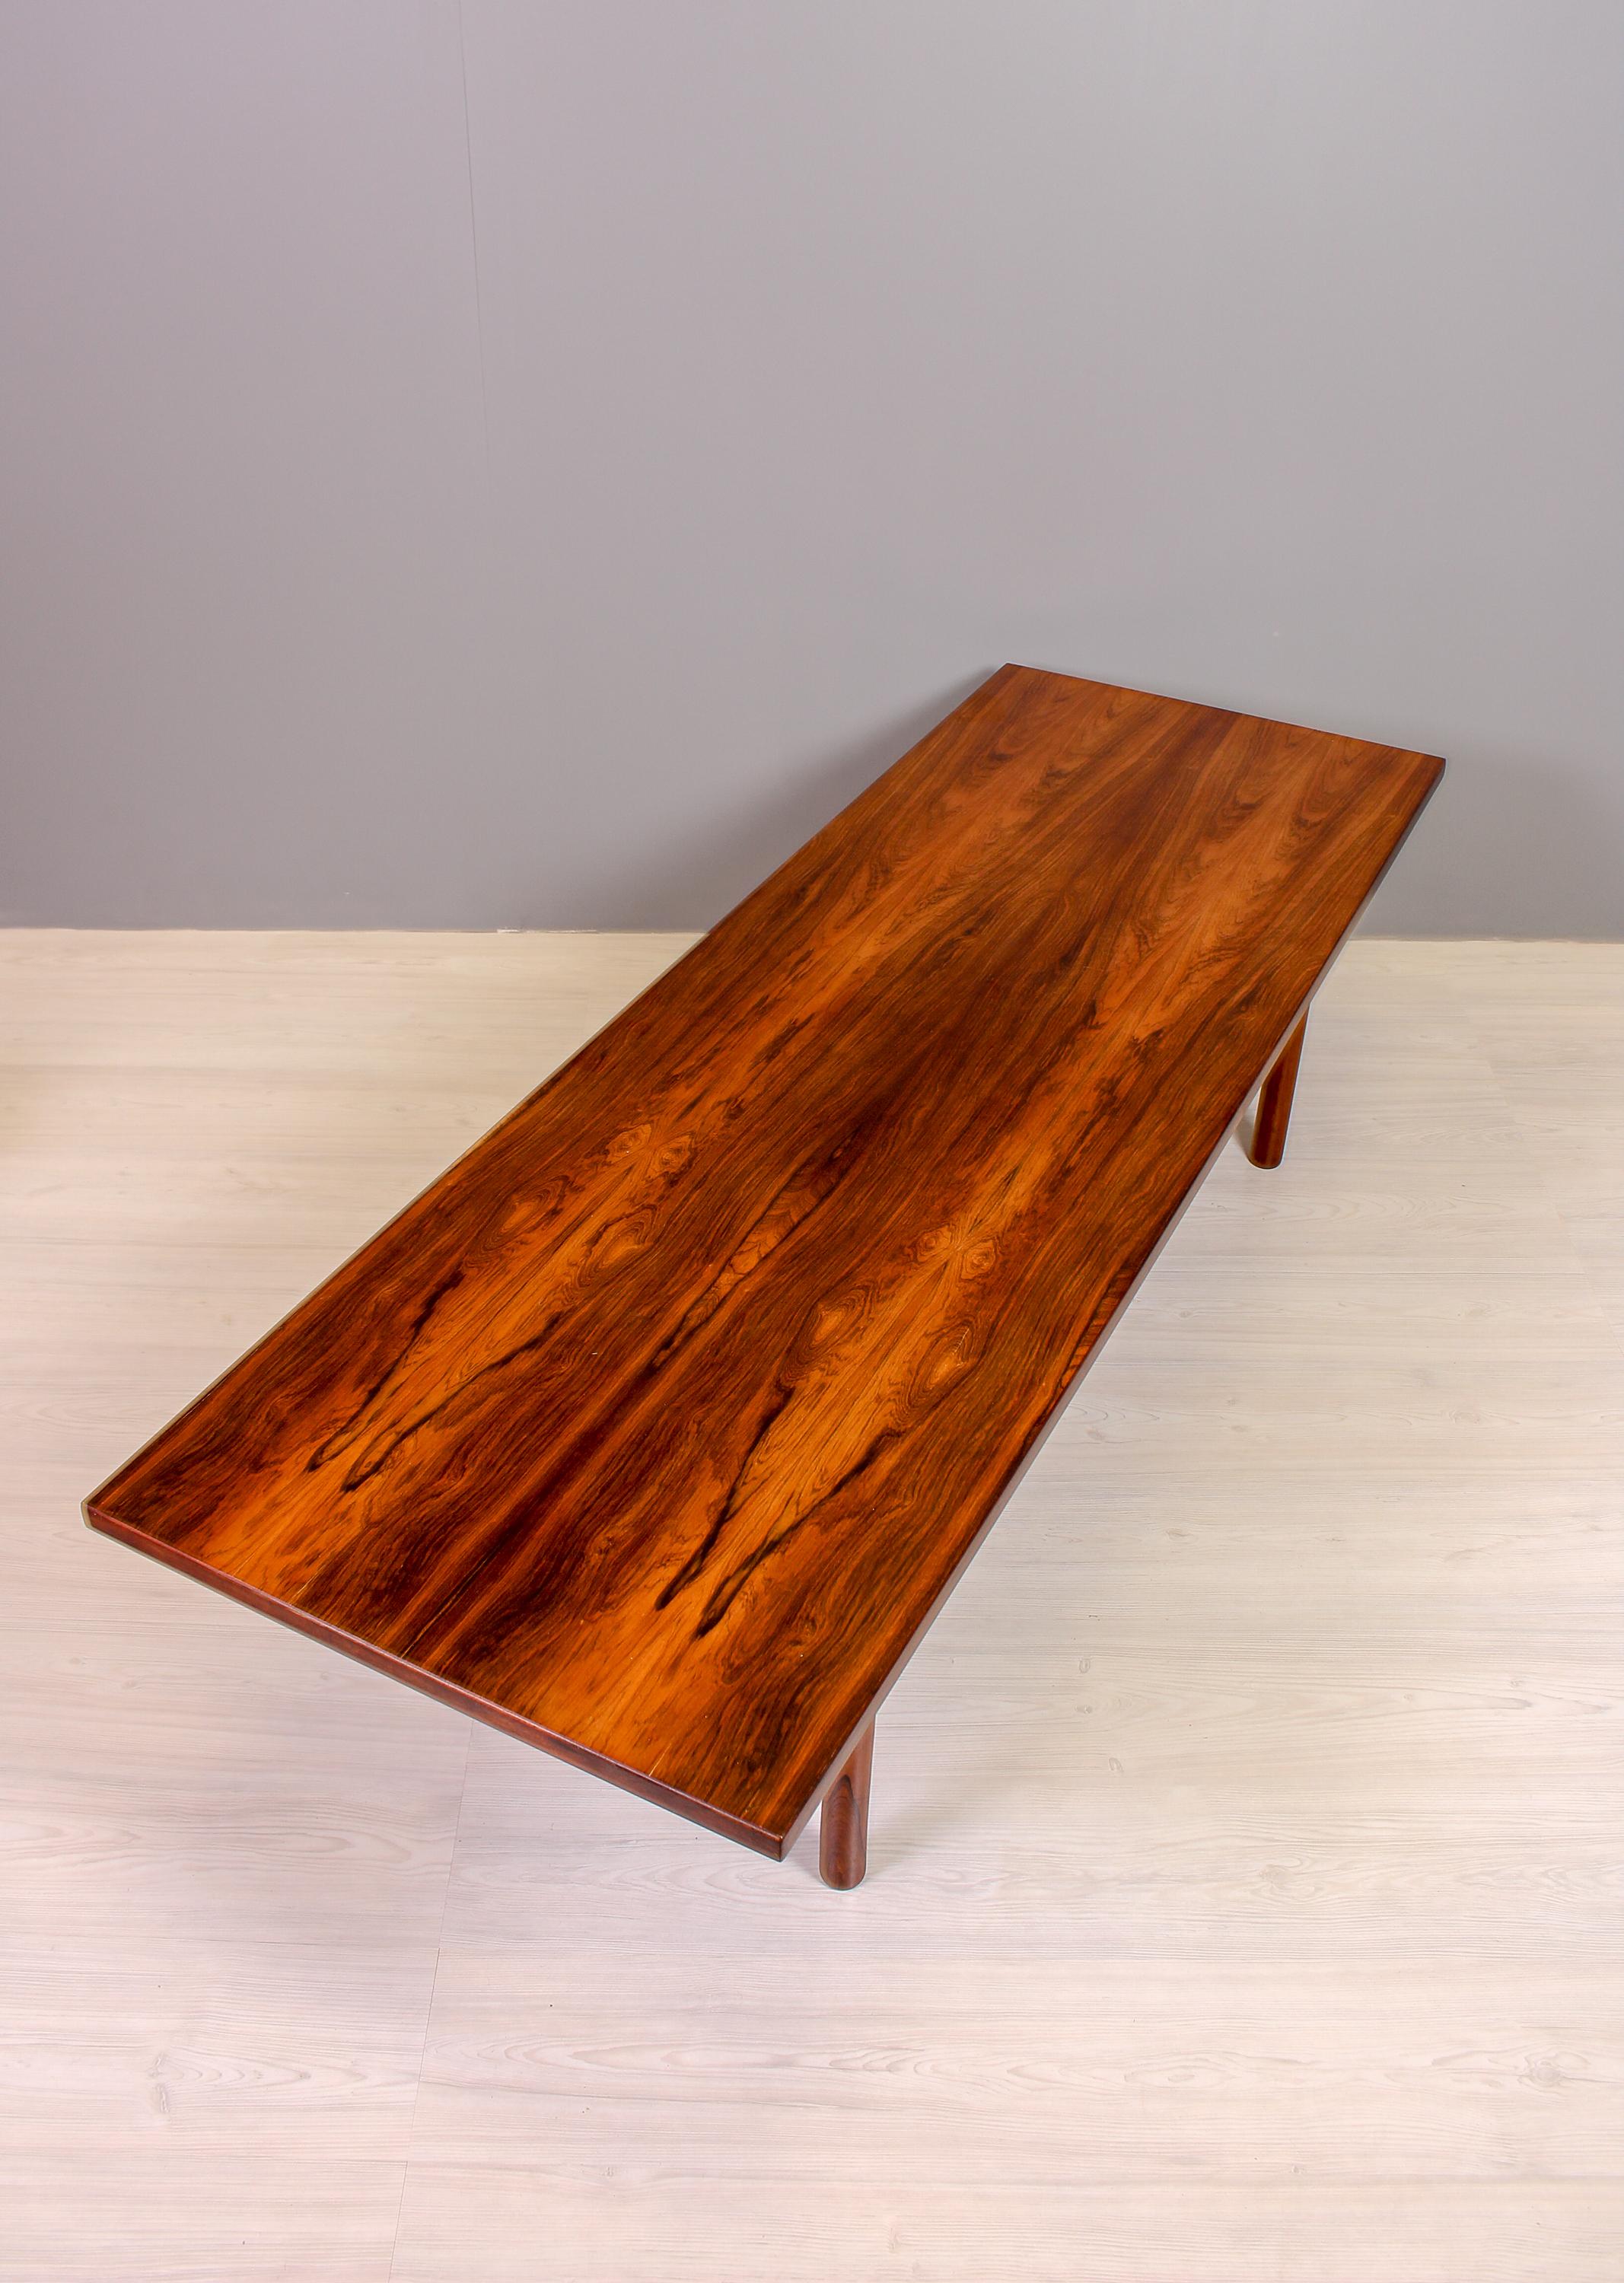 Hans J Wegner Rosewood Coffee Table by Andreas Tuck, 1950s For Sale 1